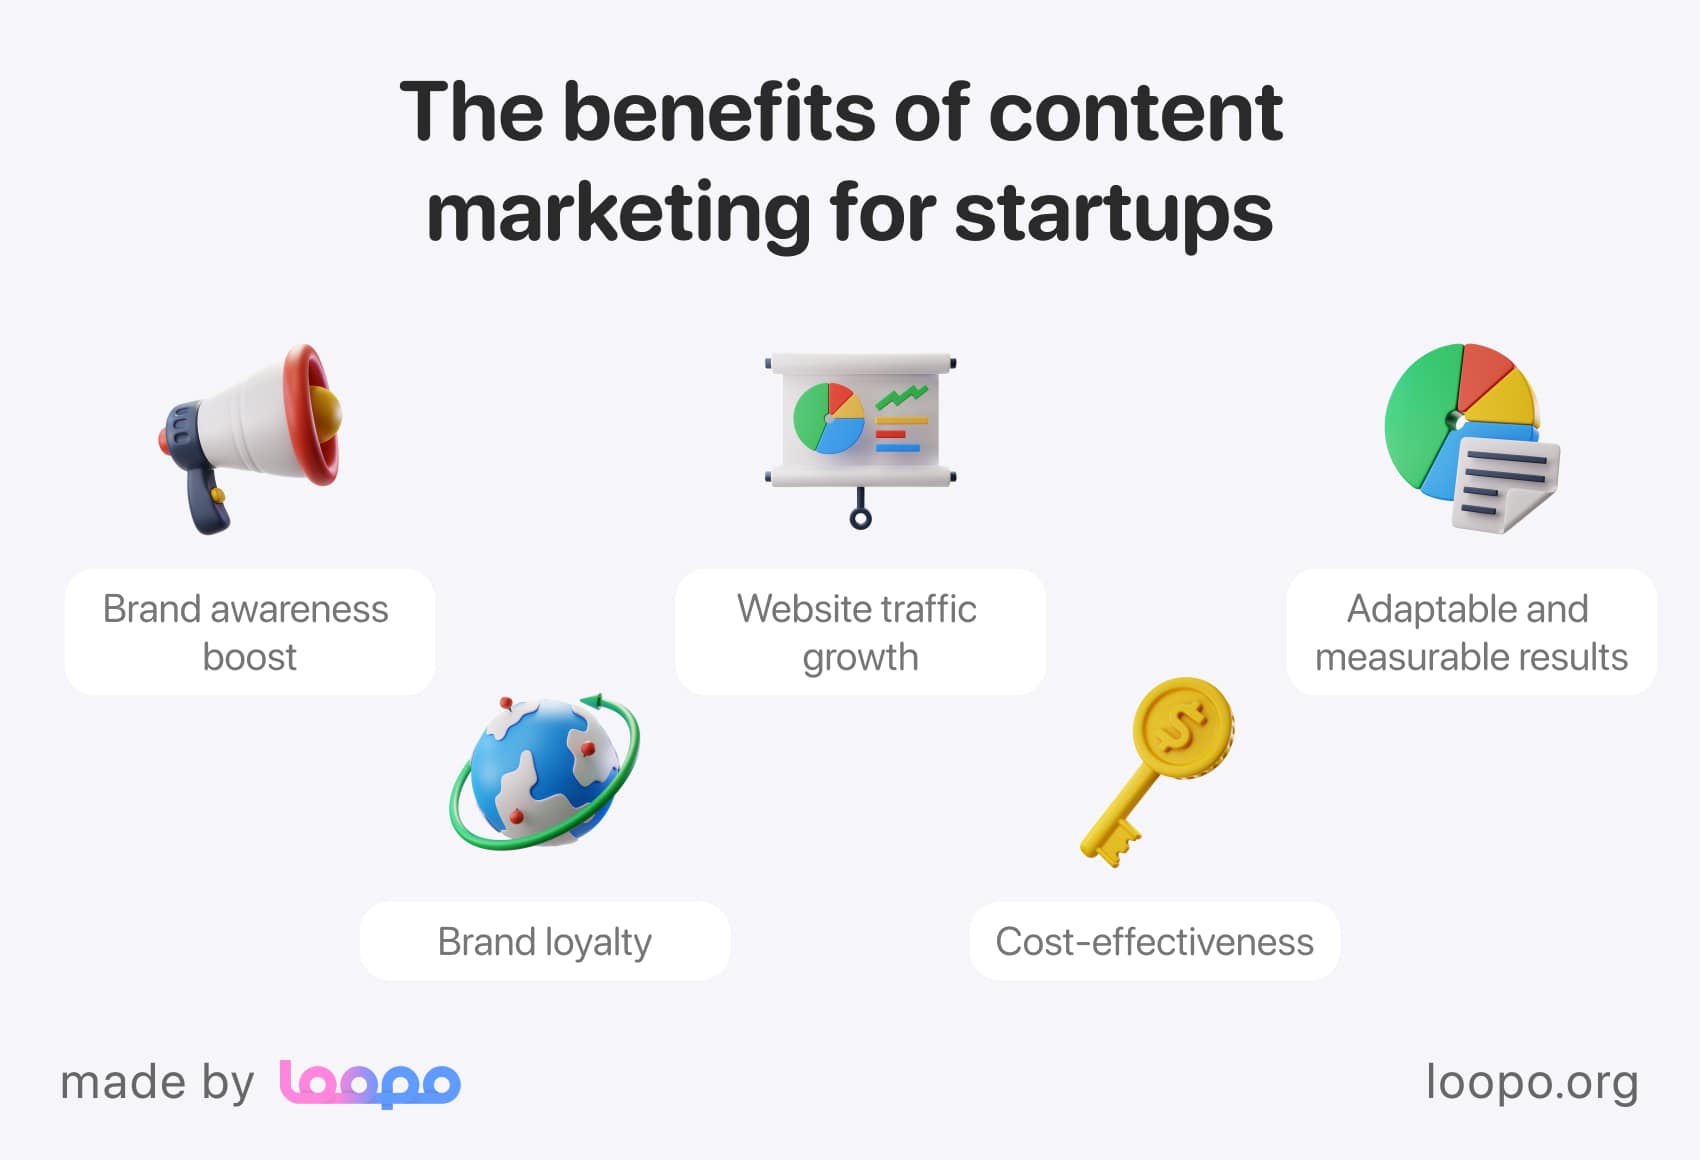 Main advantages of content marketing for startups